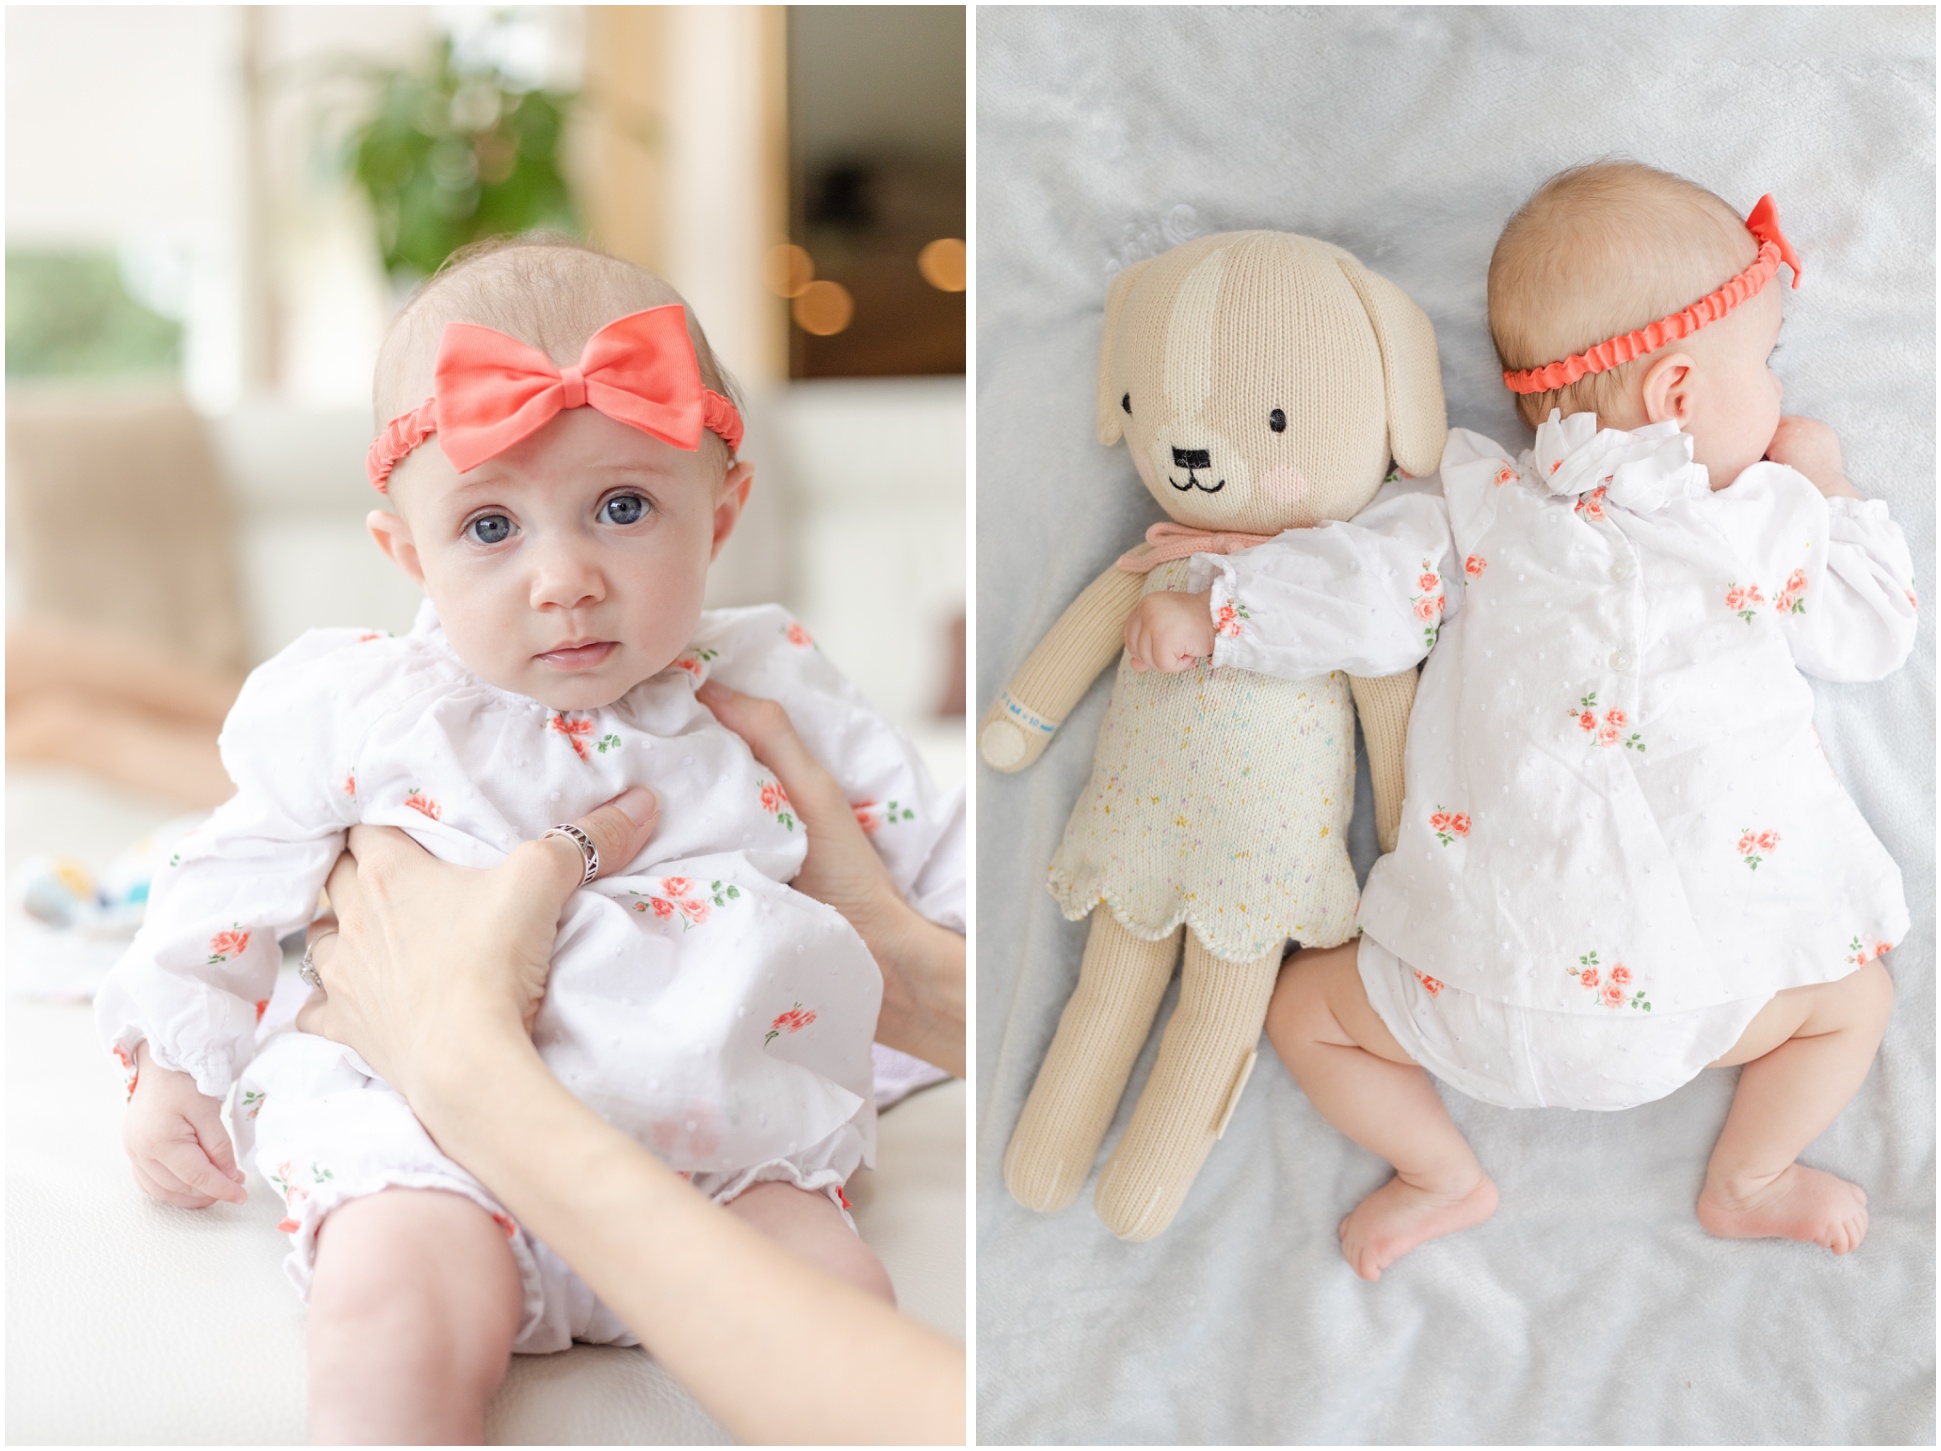 Lily Sage wearing a coral bow and her puppy doll